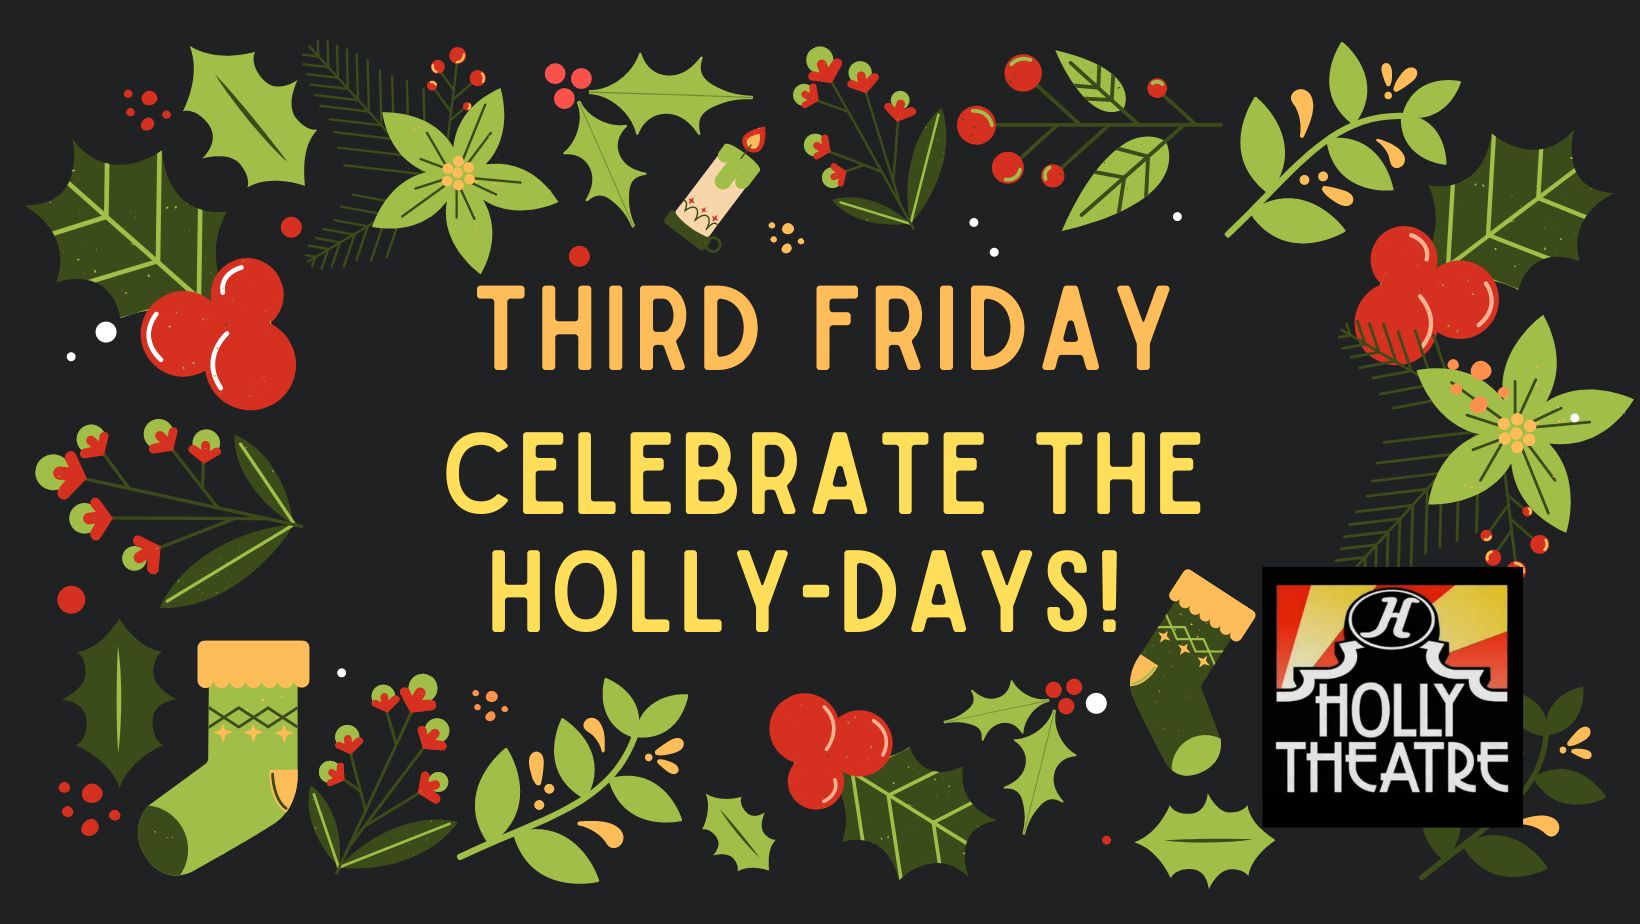 Third Friday! The Holly-Days Edition! at the Holly Theatre.